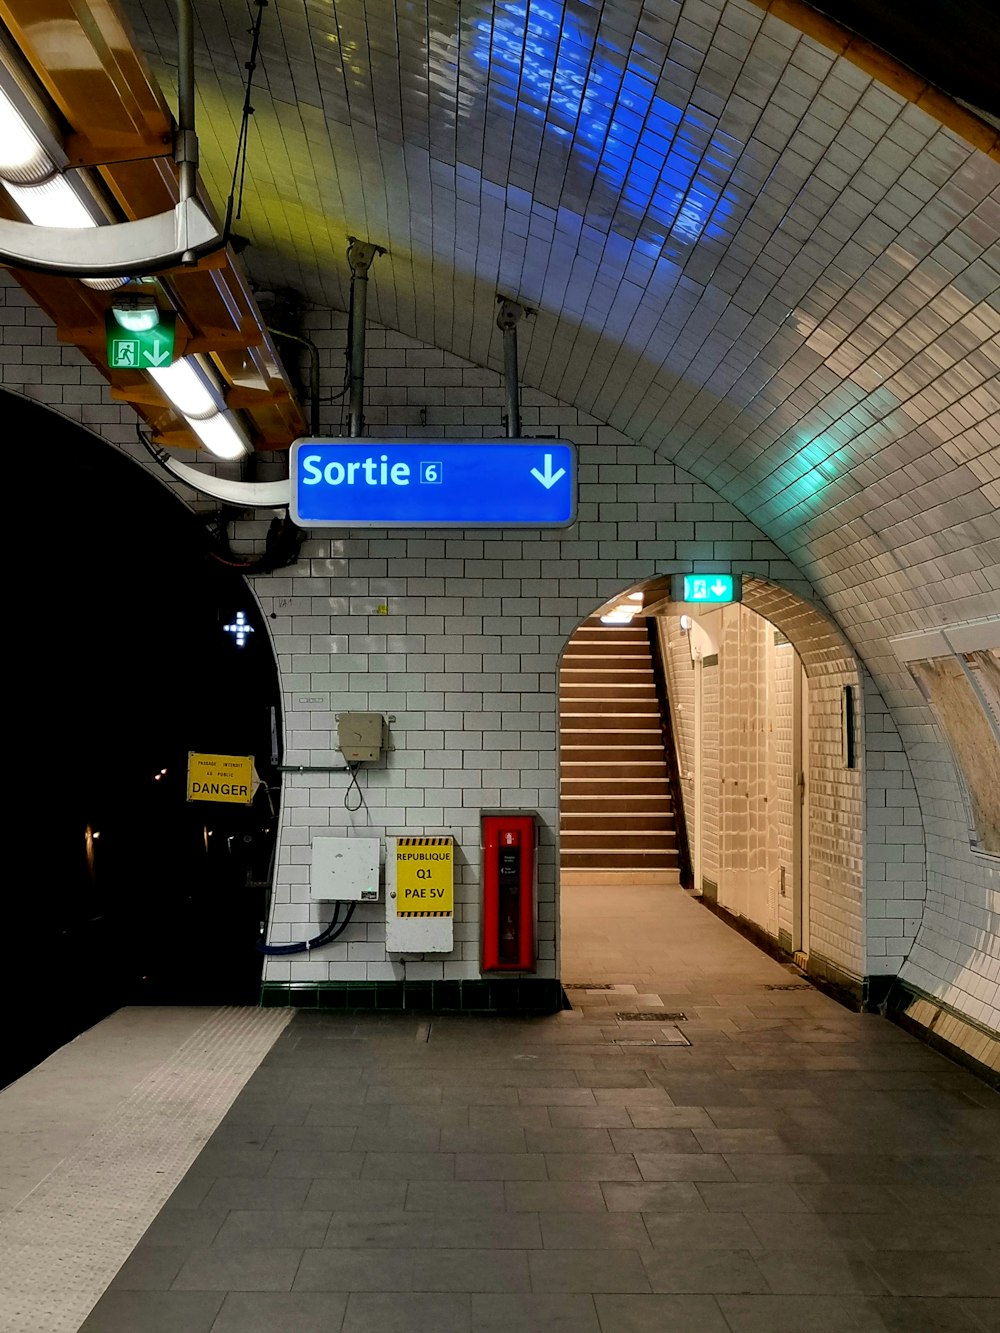 a subway station with a blue sign and stairs